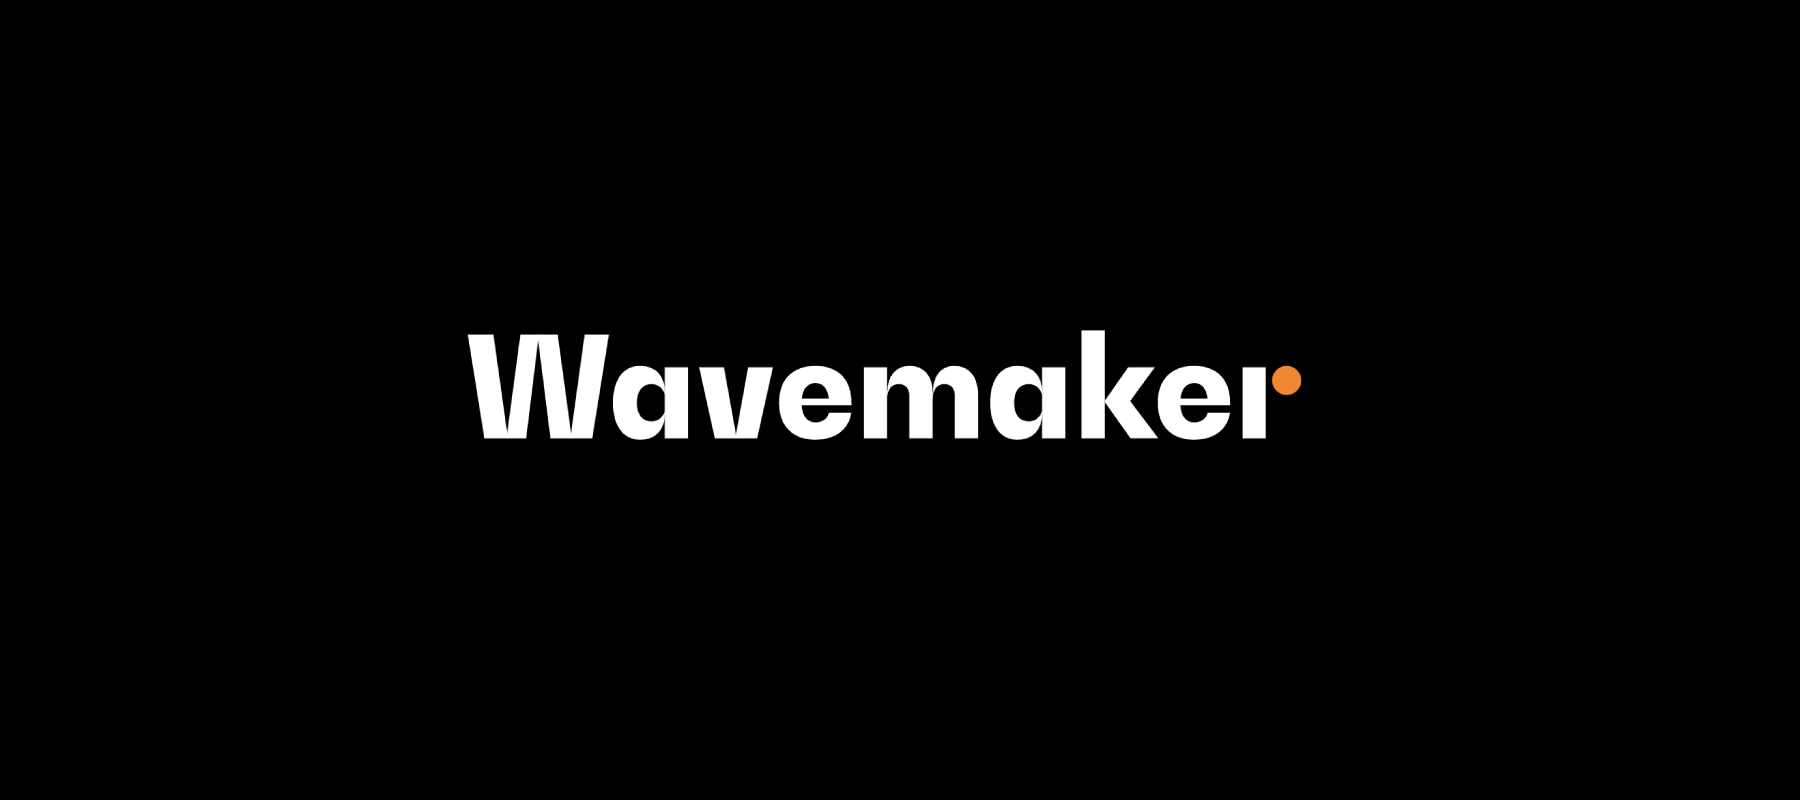 Wavemaker China and Yoyi Tech evaluate the MarTech and AI landscape